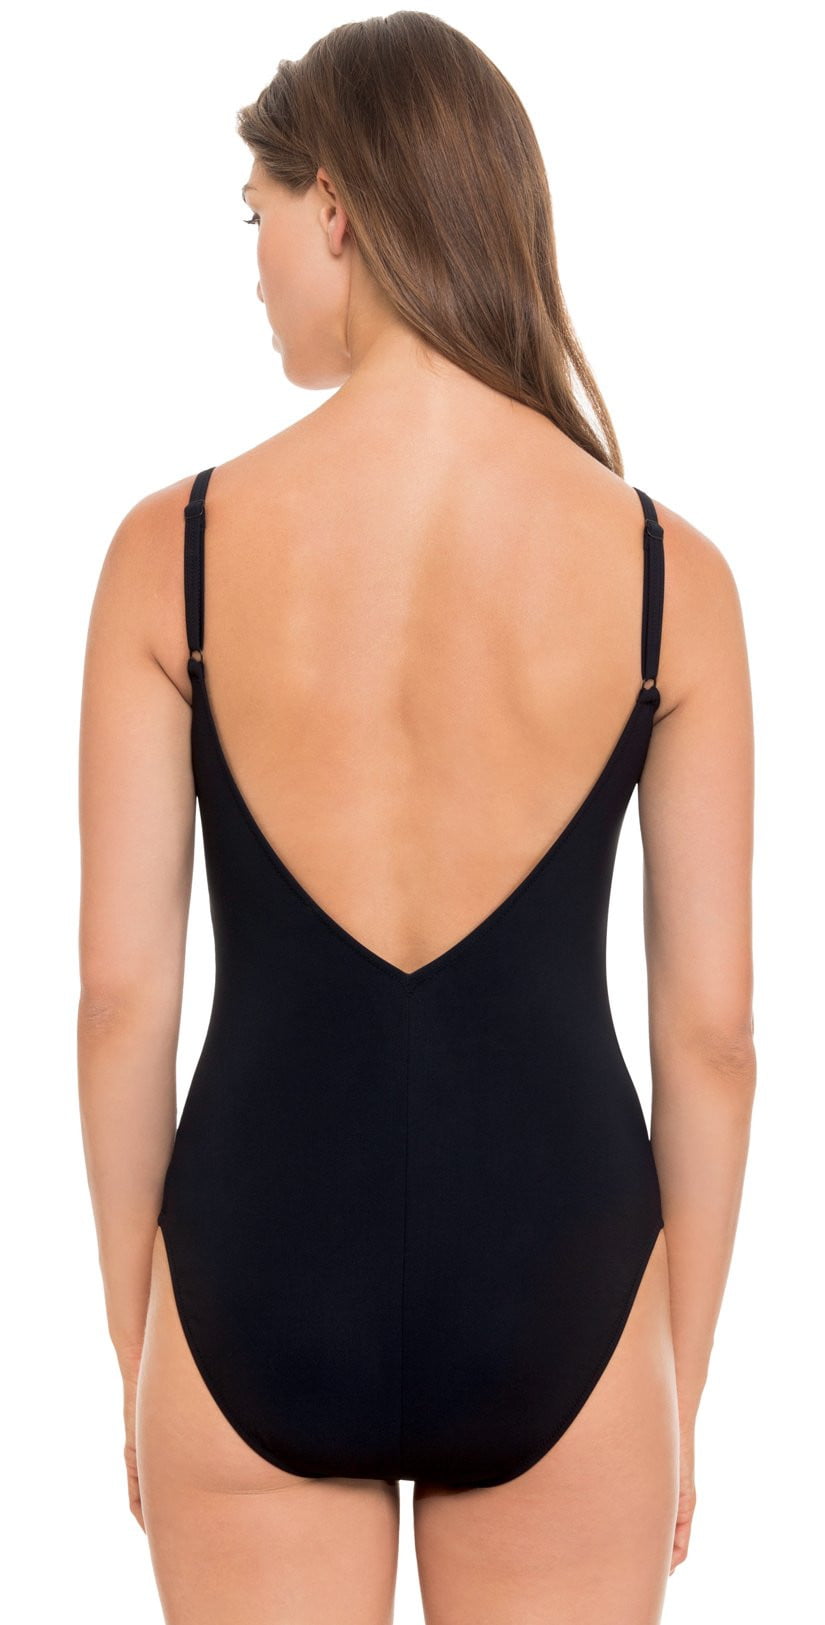 Profile by Gottex Hollywood One-Piece Swimsuit in Black E854-2074-001: